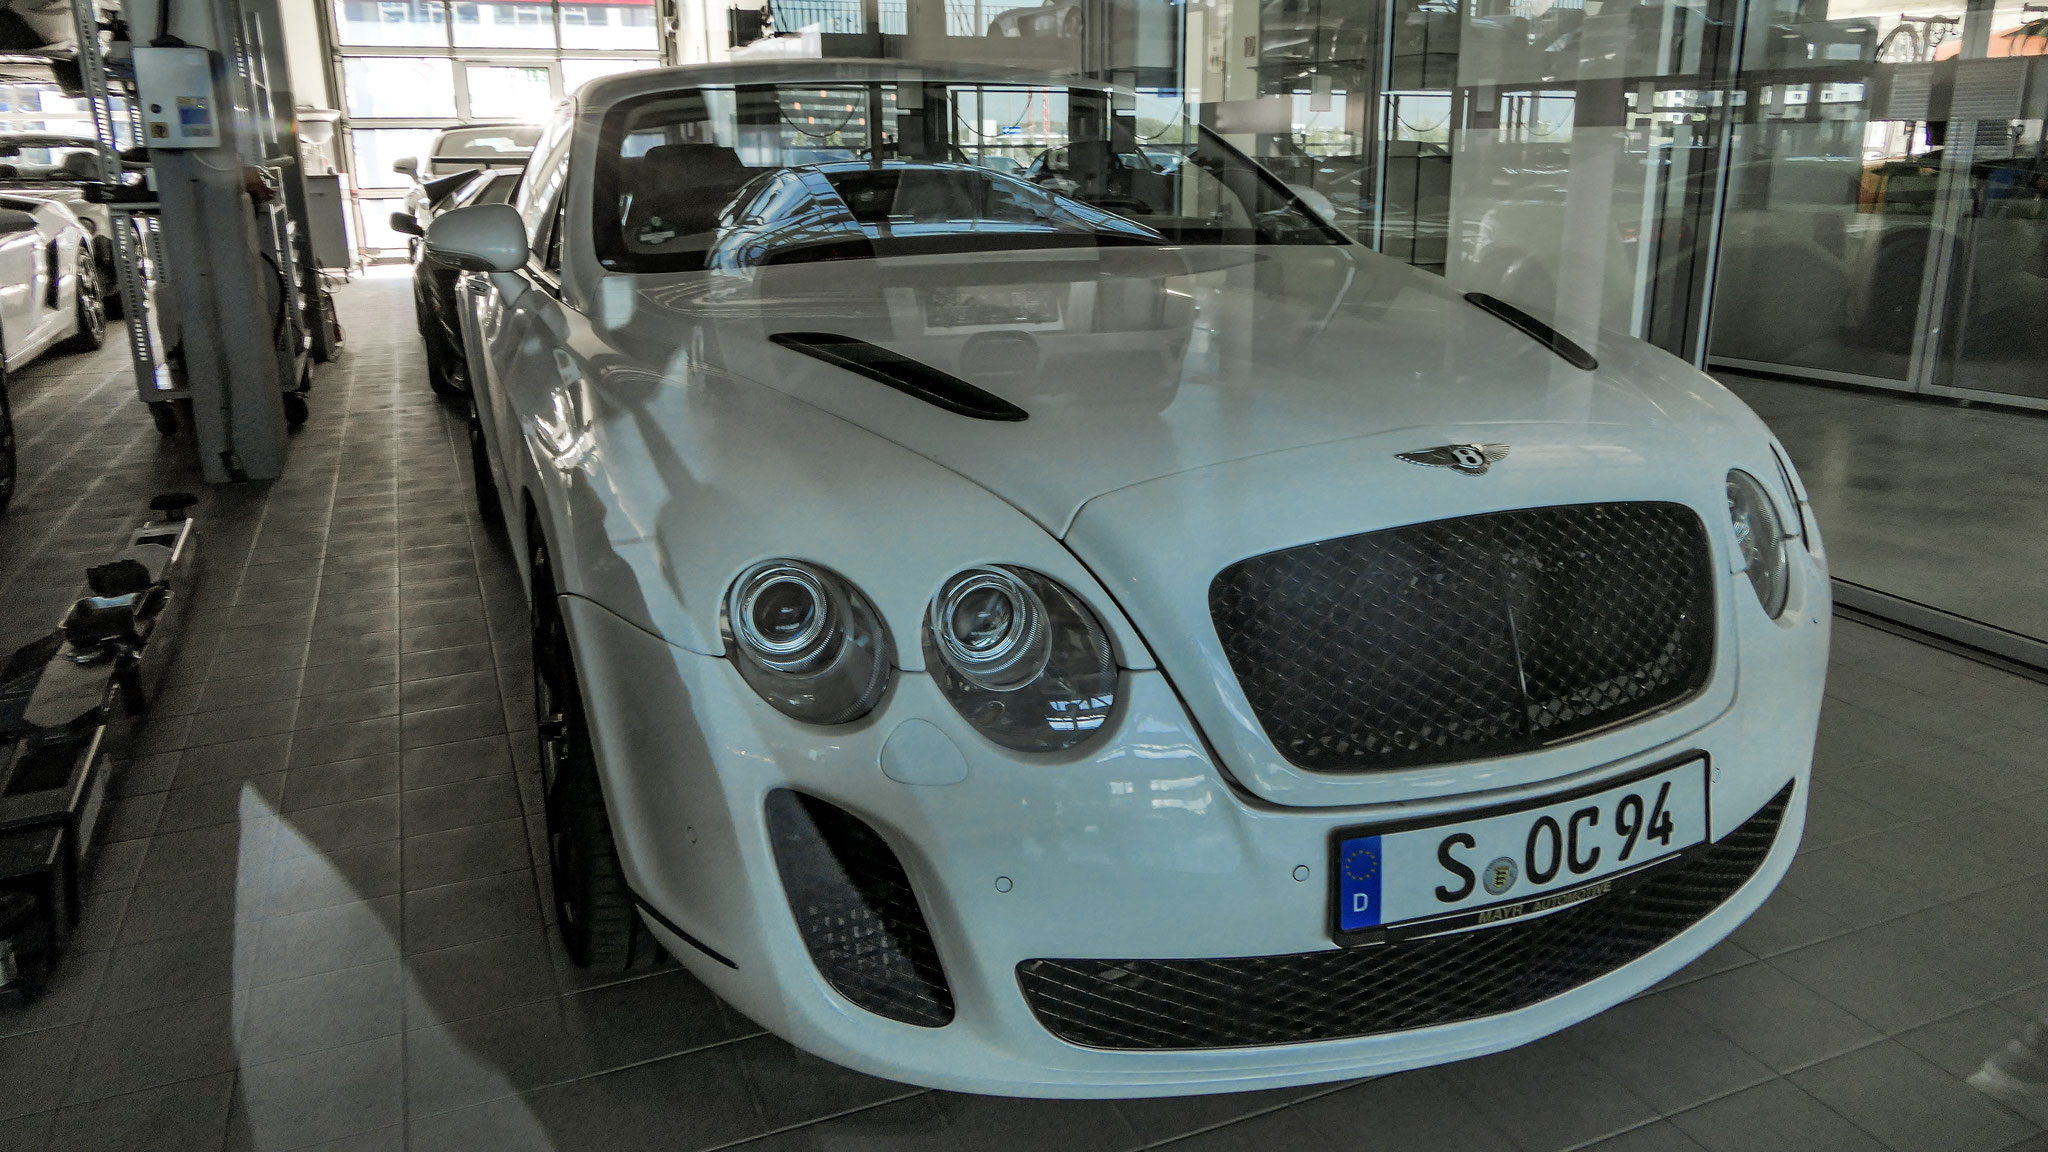 Bentley Continental GT Supersports - S-OC-94